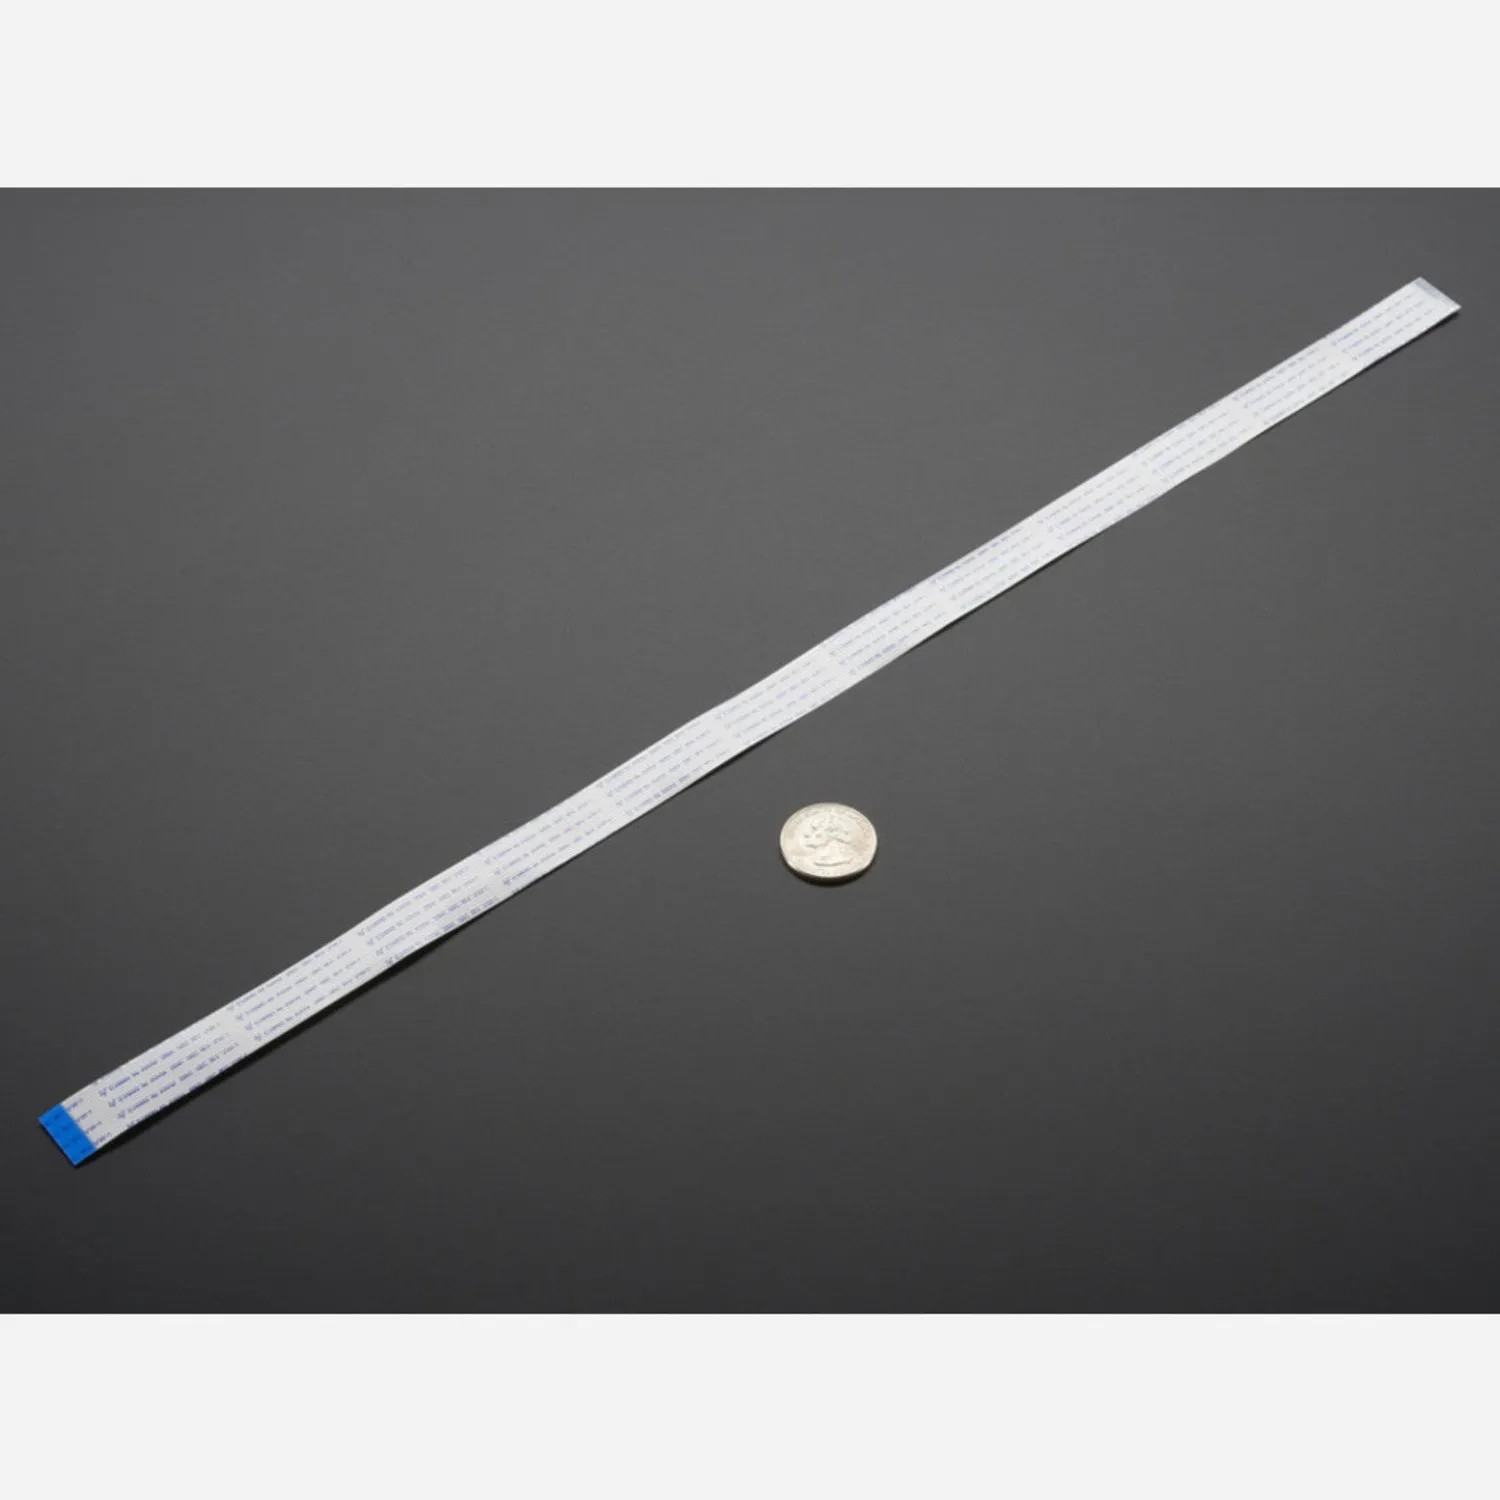 Photo of Flex Cable for Raspberry Pi Camera - 24 / 610mm